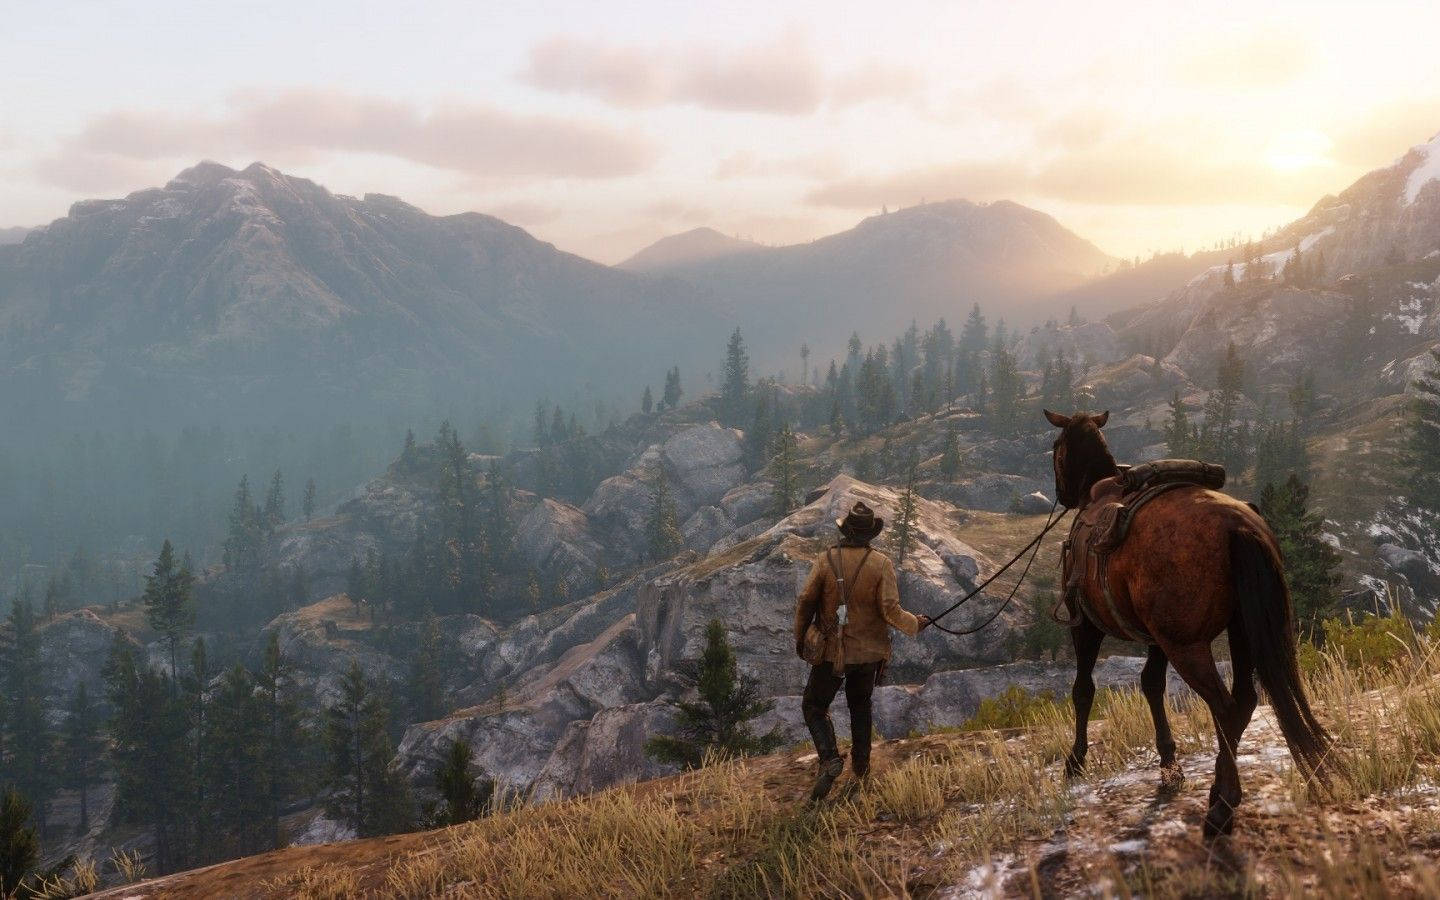 Enjoy every chilling adventure with your closest friend in "Red Dead Redemption 2". Wallpaper